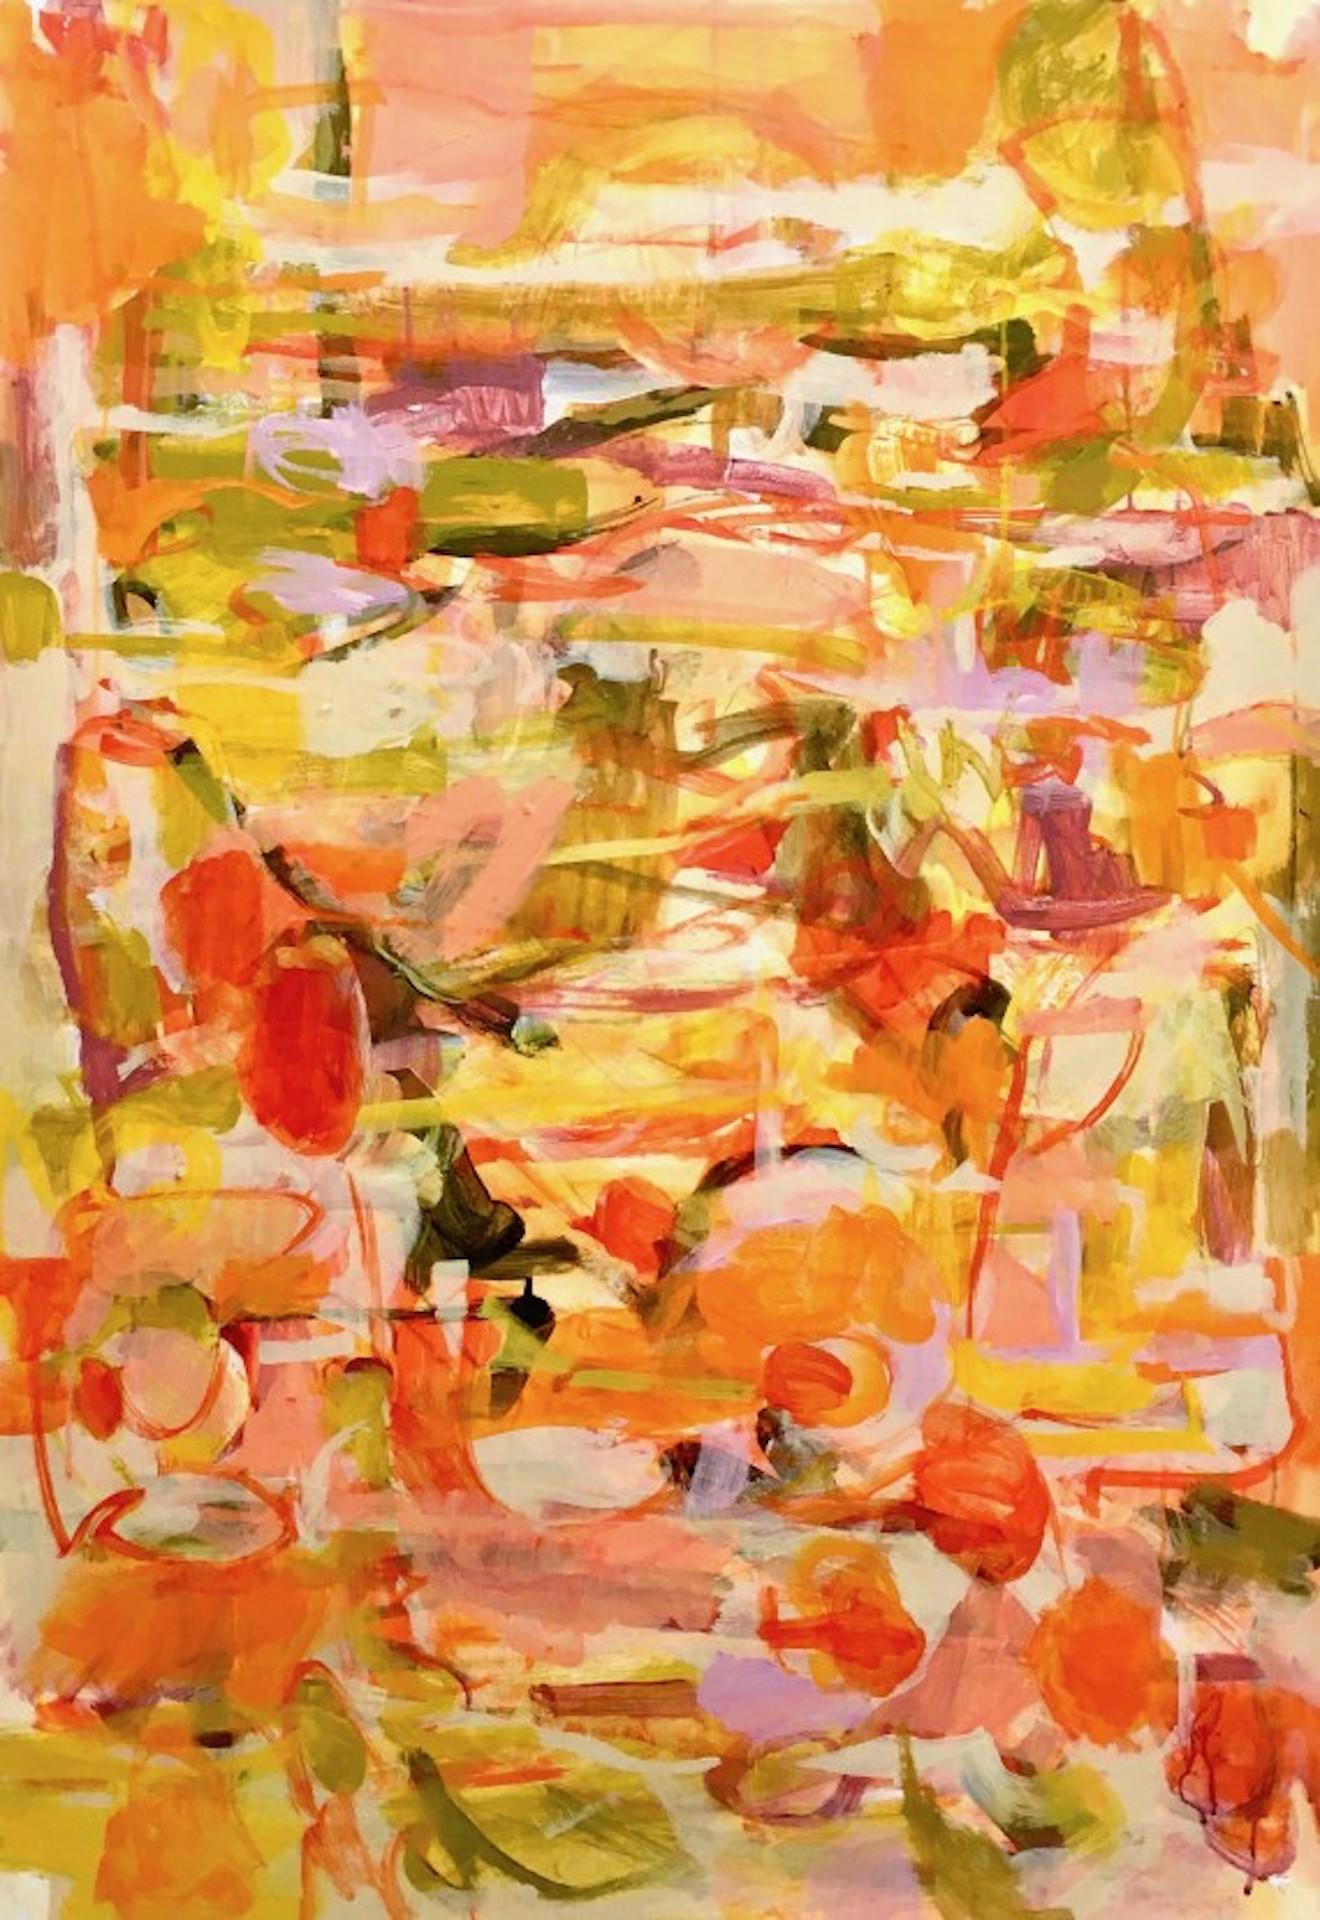 Tumbling Autumn is an original abstract painting by Janet Keith. The painting is a warm and vibrant expression in rich yellows and orange in transparent and opaque brush marks and washes. It is perhaps evocative of the warm honeyed days of early